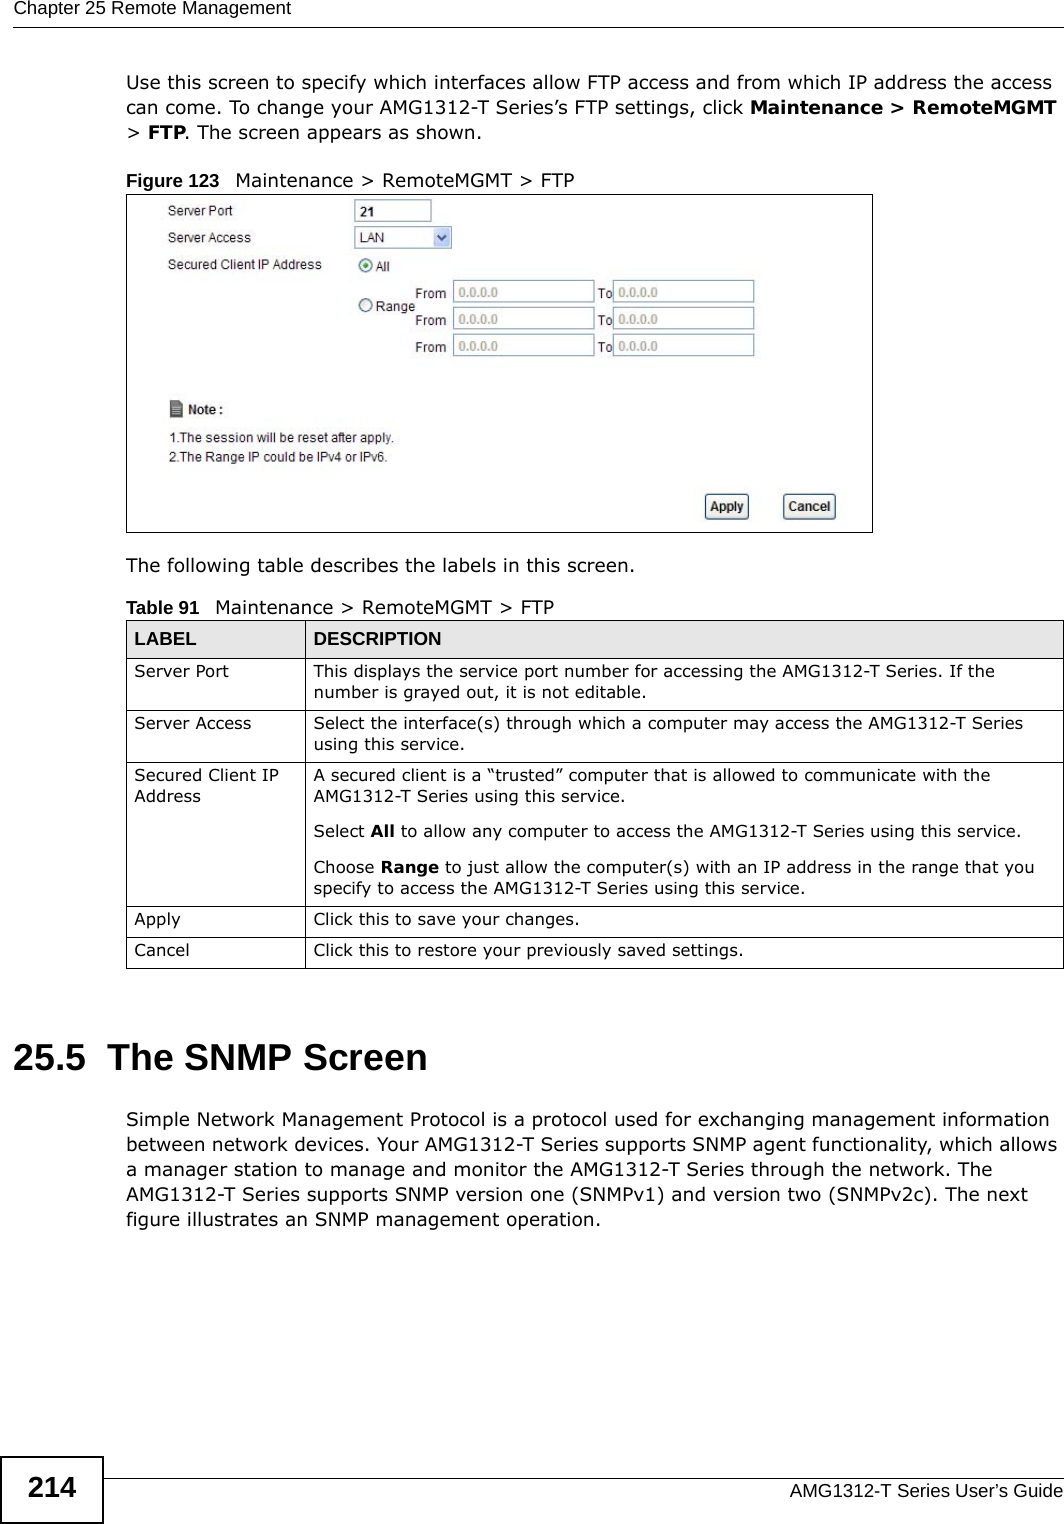 Chapter 25 Remote ManagementAMG1312-T Series User’s Guide214Use this screen to specify which interfaces allow FTP access and from which IP address the access can come. To change your AMG1312-T Series’s FTP settings, click Maintenance &gt; RemoteMGMT &gt; FTP. The screen appears as shown.Figure 123   Maintenance &gt; RemoteMGMT &gt; FTPThe following table describes the labels in this screen. 25.5  The SNMP ScreenSimple Network Management Protocol is a protocol used for exchanging management information between network devices. Your AMG1312-T Series supports SNMP agent functionality, which allows a manager station to manage and monitor the AMG1312-T Series through the network. The AMG1312-T Series supports SNMP version one (SNMPv1) and version two (SNMPv2c). The next figure illustrates an SNMP management operation.Table 91   Maintenance &gt; RemoteMGMT &gt; FTPLABEL DESCRIPTIONServer Port This displays the service port number for accessing the AMG1312-T Series. If the number is grayed out, it is not editable.Server Access Select the interface(s) through which a computer may access the AMG1312-T Series using this service.Secured Client IP AddressA secured client is a “trusted” computer that is allowed to communicate with the AMG1312-T Series using this service. Select All to allow any computer to access the AMG1312-T Series using this service.Choose Range to just allow the computer(s) with an IP address in the range that you specify to access the AMG1312-T Series using this service.Apply Click this to save your changes.Cancel Click this to restore your previously saved settings.